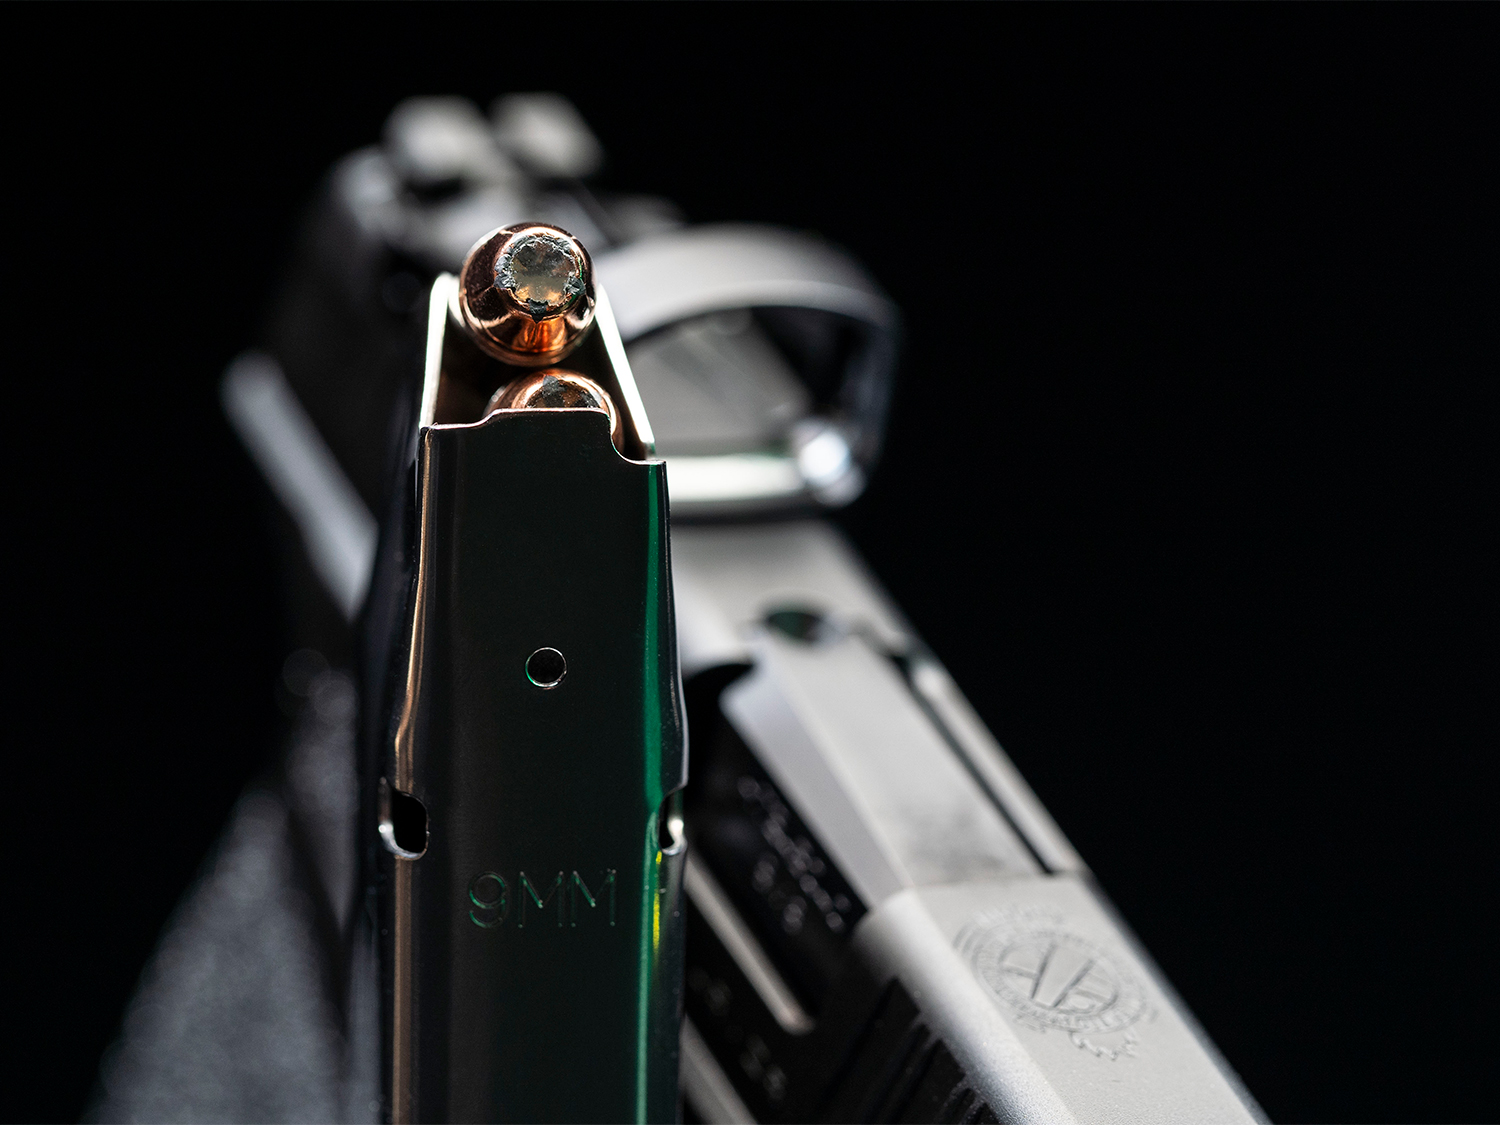 .380 vs. 9mm: Which Is the Better Cartridge for Personal Protection?